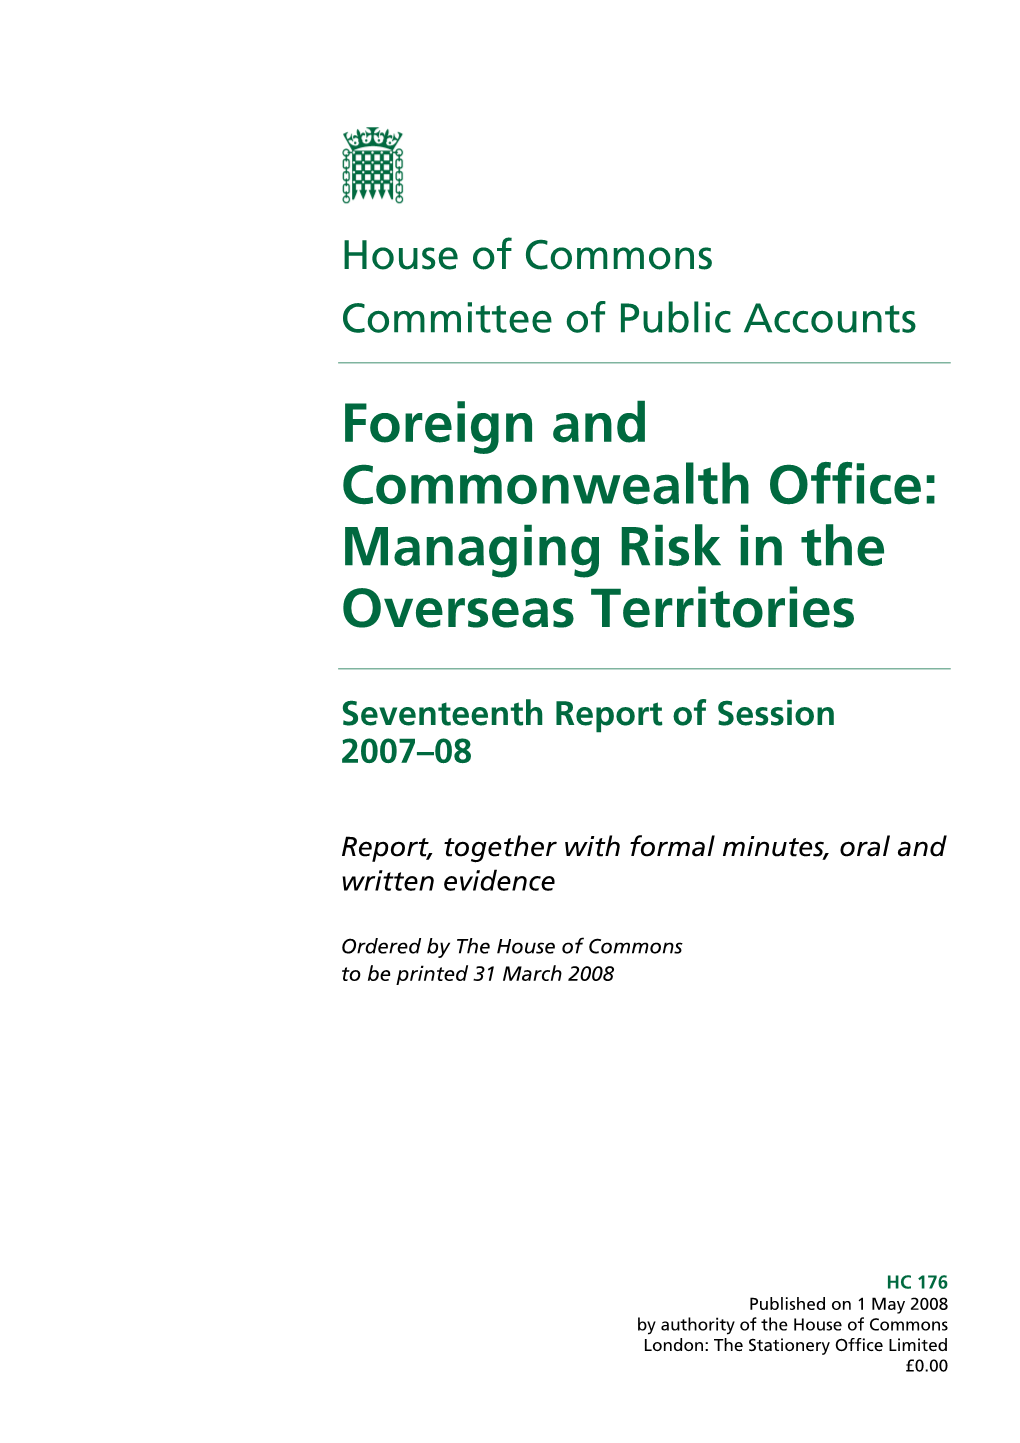 Foreign and Commonwealth Office: Managing Risk in the Overseas Territories